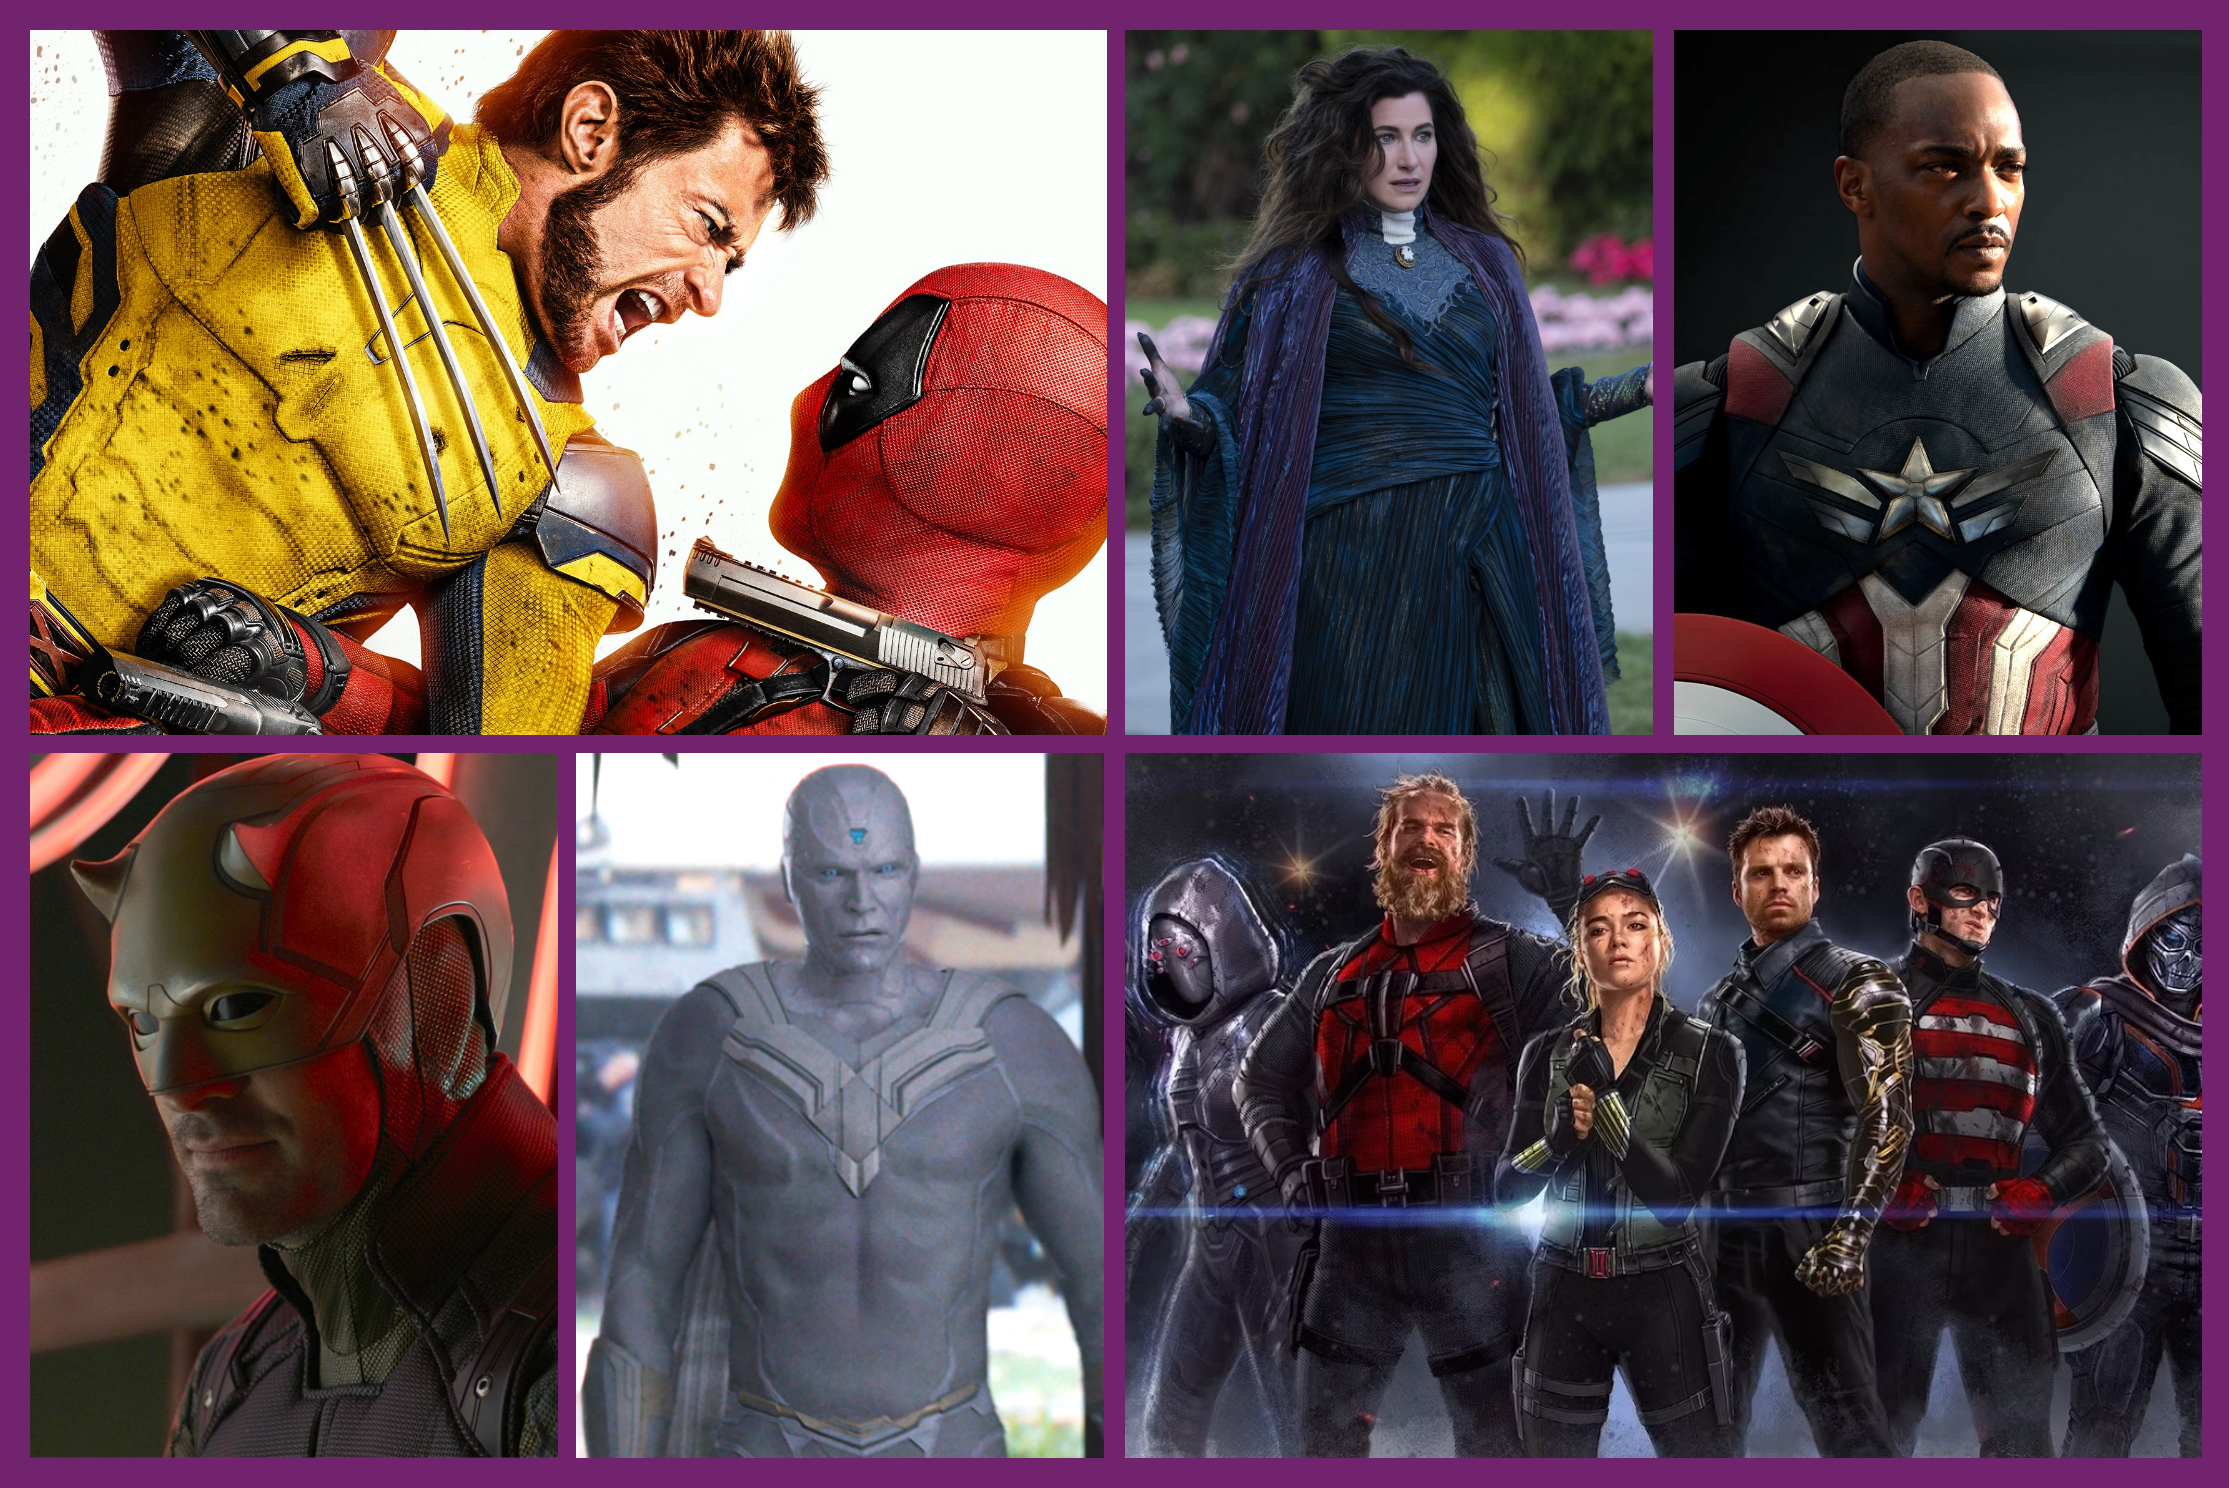 Photos, stills, and artwork from upcoming Marvel Studios movies and TV shows, including Deadpool &amp; Wolverine, Agatha All Along, Captain America: Brave New World, Daredevil: Born Again, Vision Quest, and Thunderbolts*.